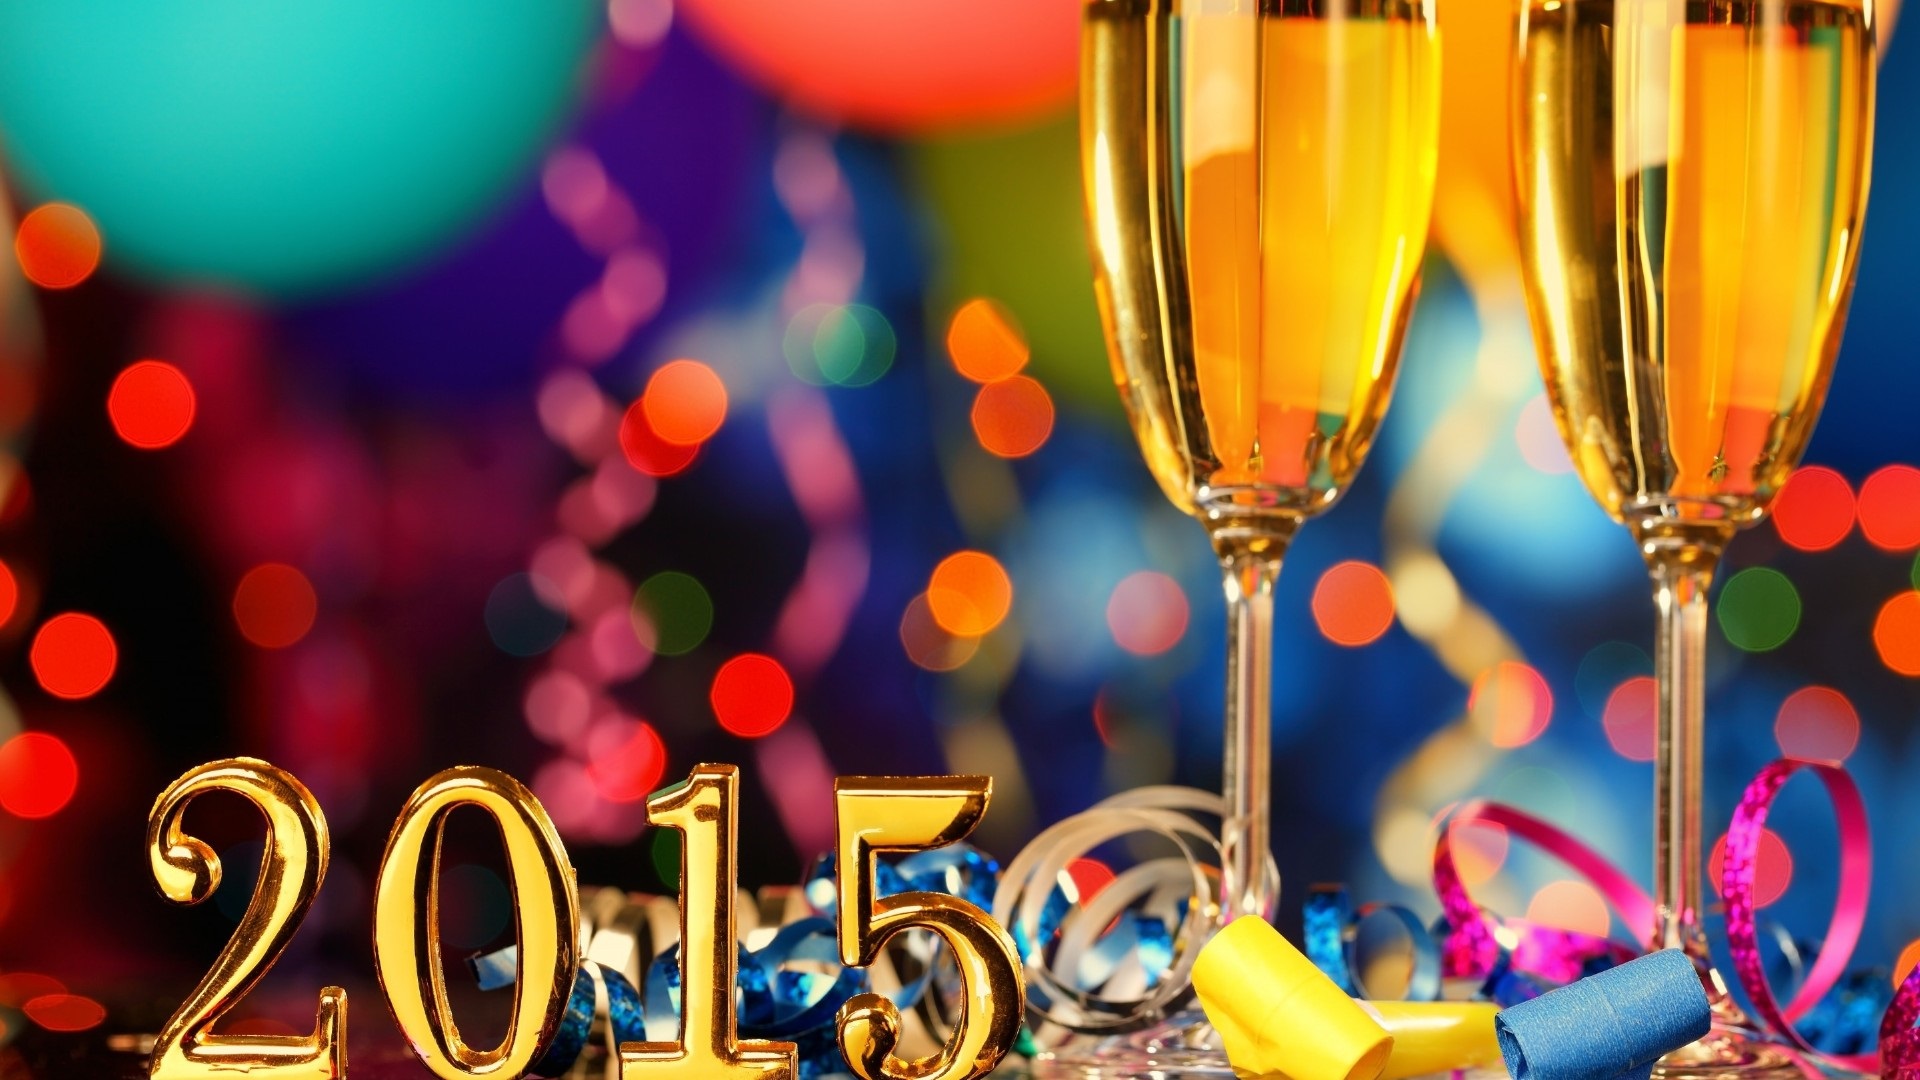 Free Happy New Years Champagne 2015 HD Wallpaper Images HD